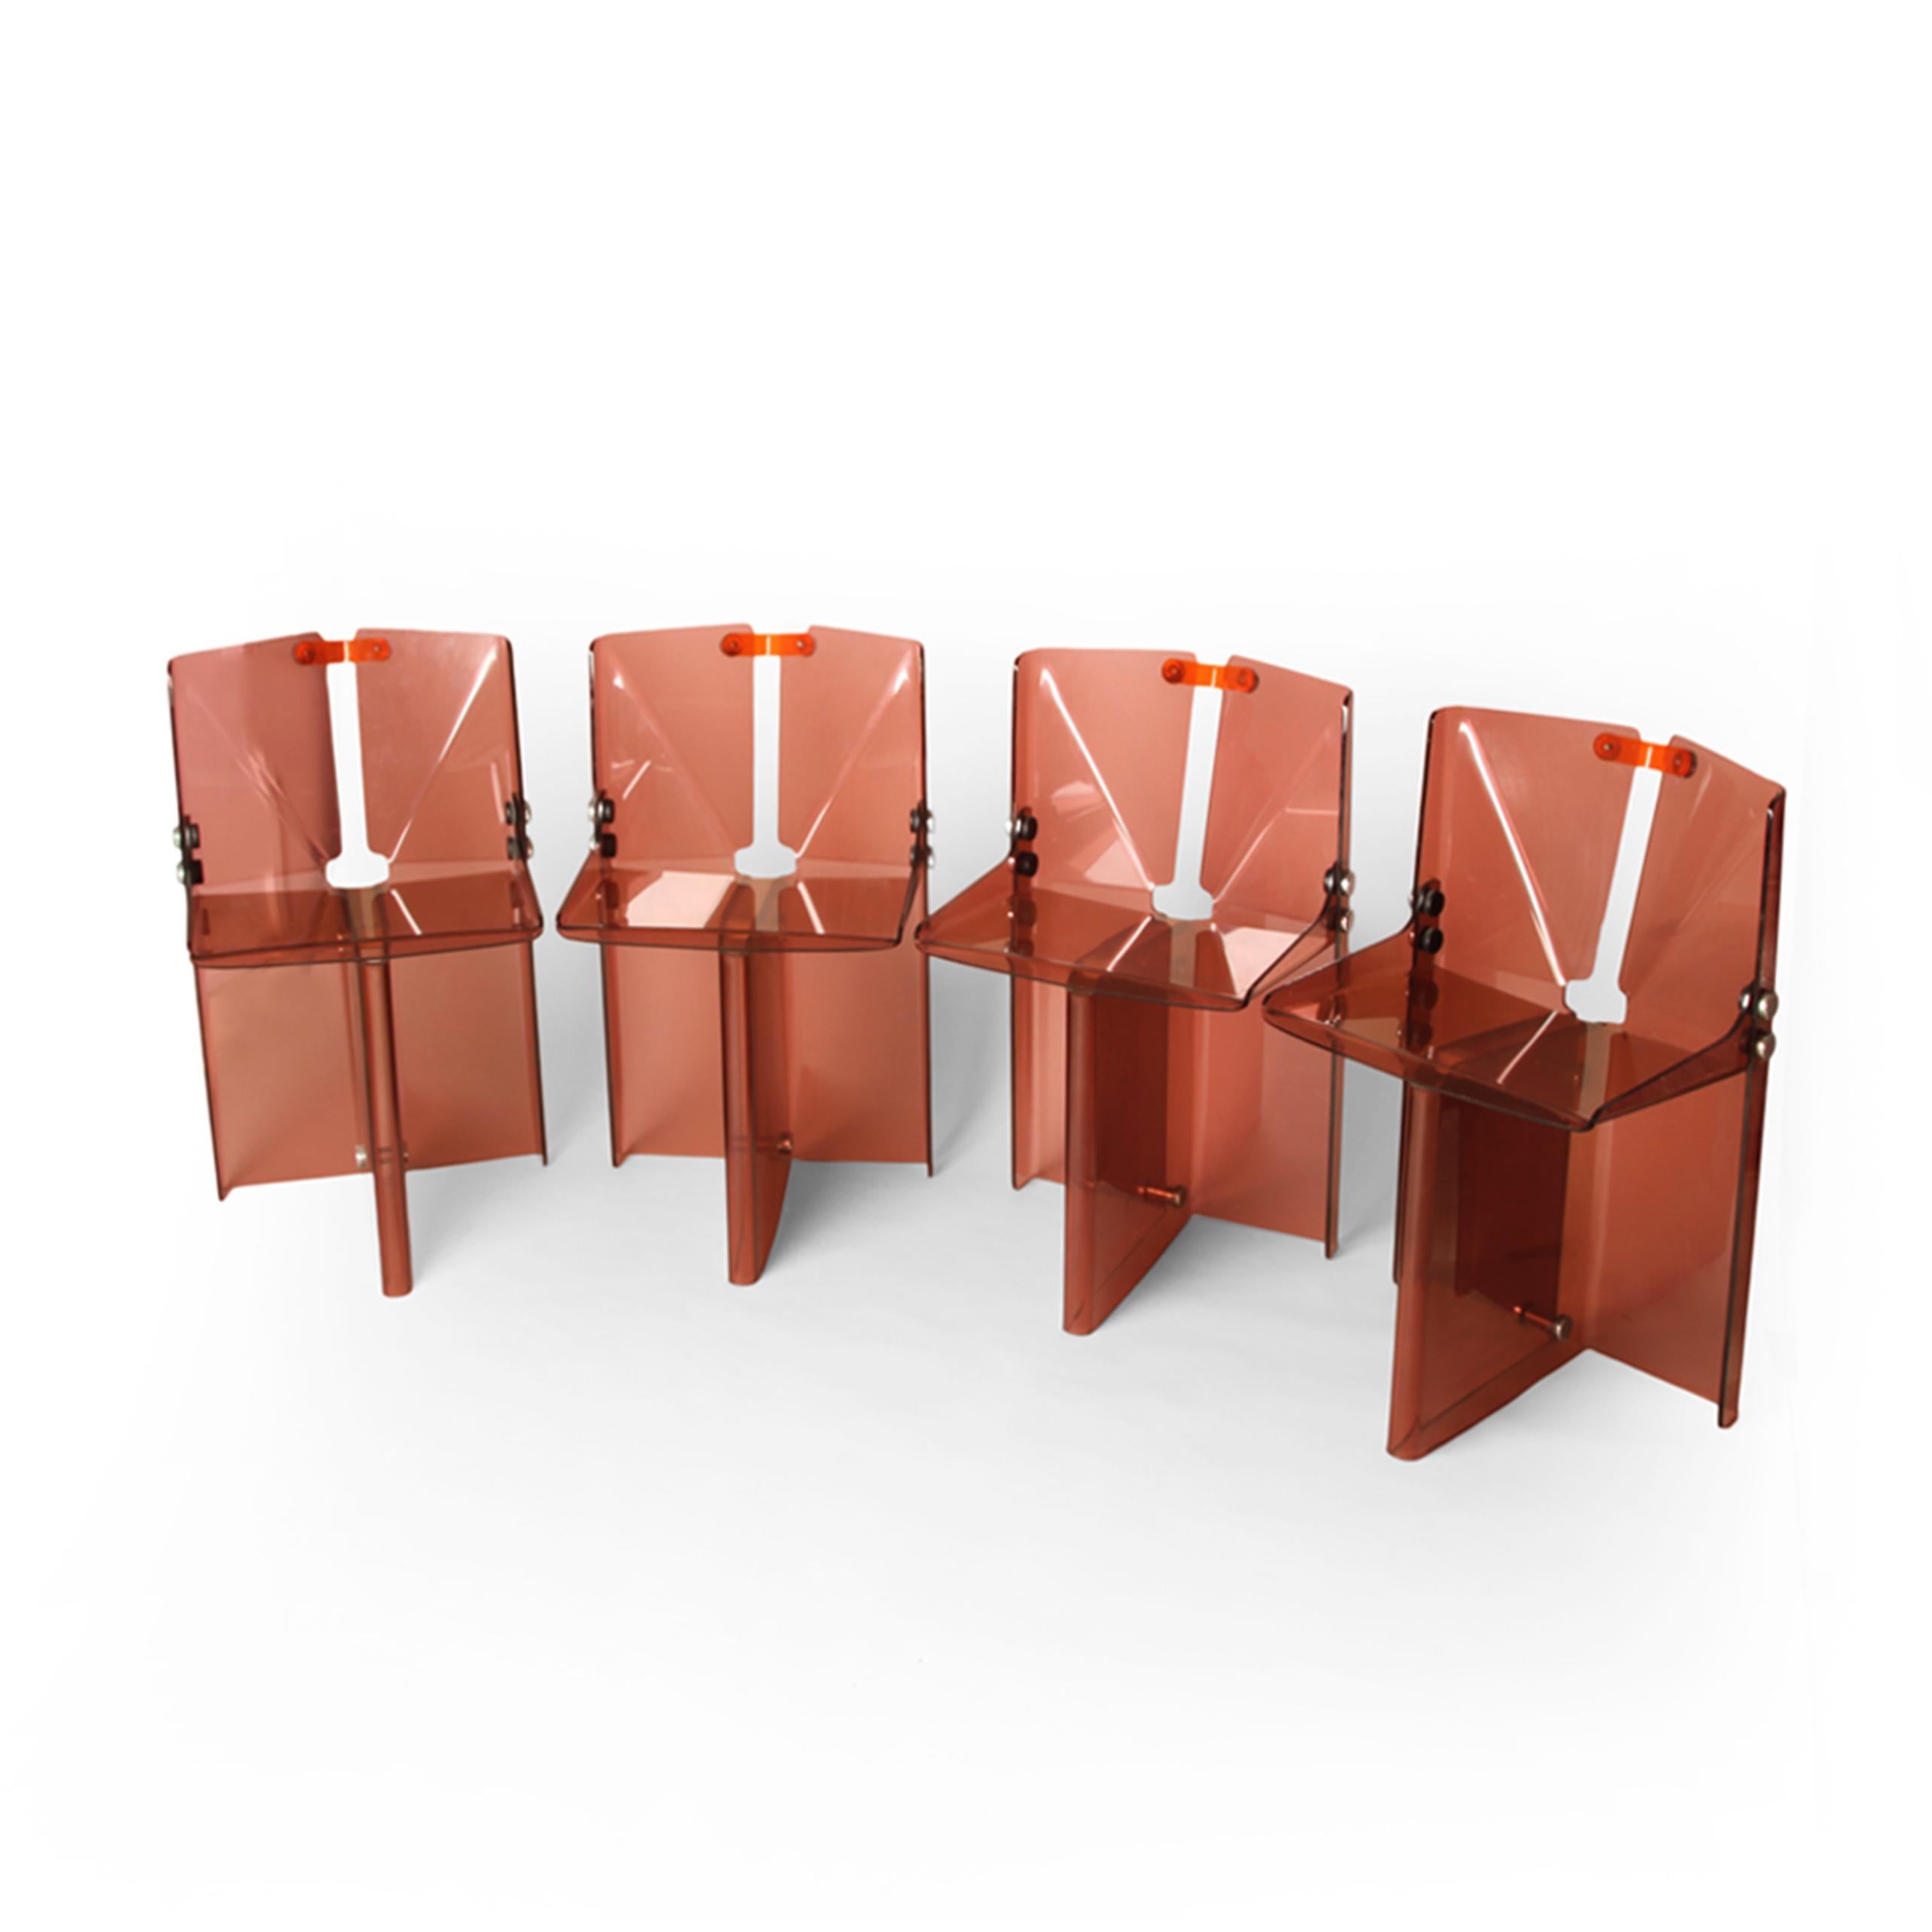 British Documented Peter Banks Unique Smoked Perspex Dining Chairs, MidCentury Space Age